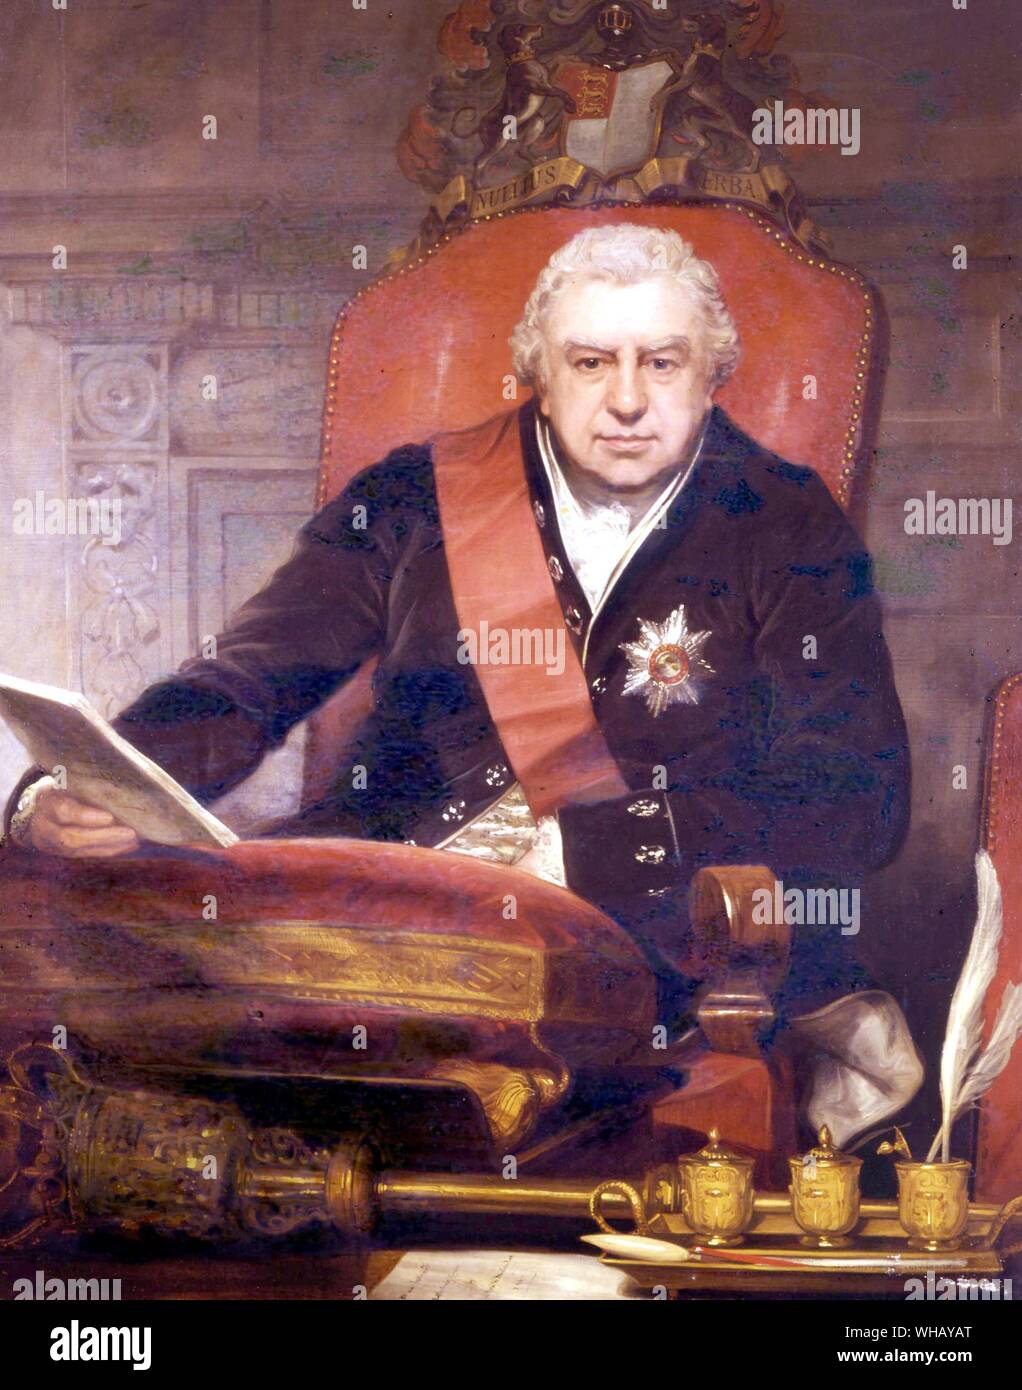 Sir Joseph Banks (1743-1820) 'the Juggernaut of British Science' as President of the Royal Society. Painted in 1810 by Sir Thomas Phillips (1770-1845), portrait painter, and a member of the Royal Academy. The African Adventure - A History of Africa's Explorers by Timothy Severin, page 105.. Sir Joseph Banks was born at Argyle Street, London, on 13 February 1743. Banks was made a Fellow of the Royal Society in 1766, and that year he travelled to Newfoundland to collect plants. During 1768-1771 he journeyed with Cook around the world in the 'Endeavour', making natural history collections, and Stock Photo